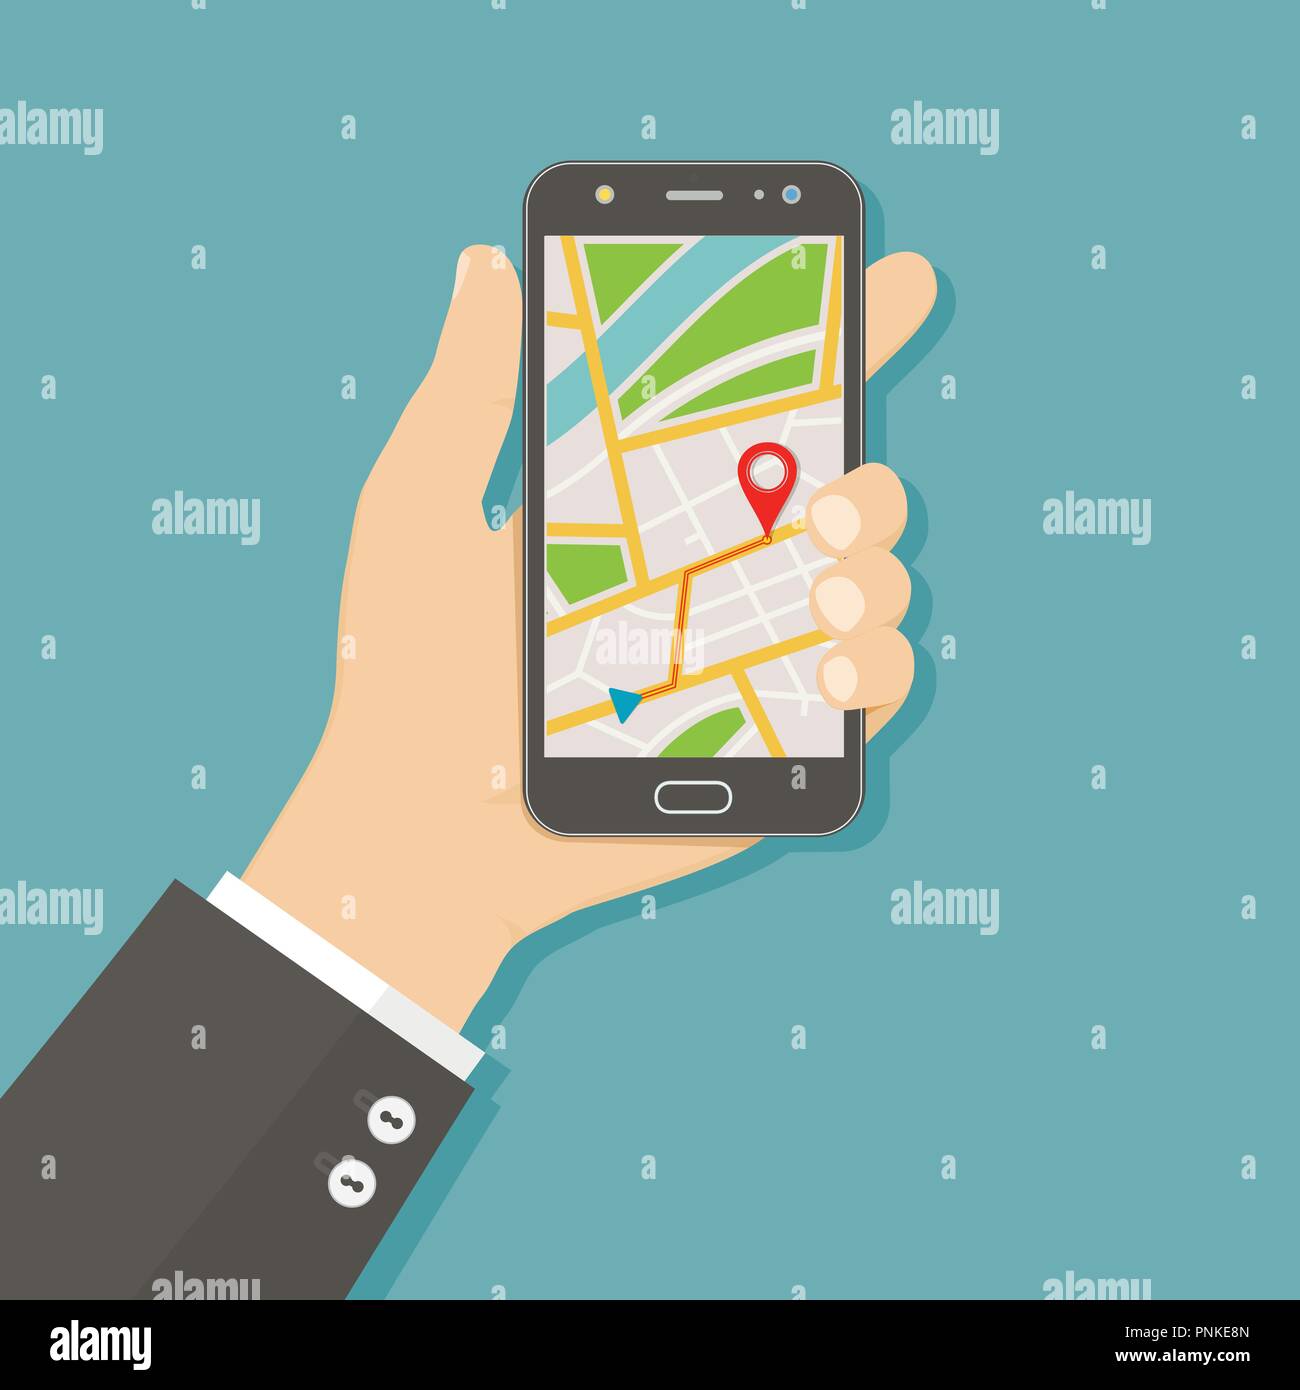 Hand holding smartphone with gps navigation map on screen. Mobile navigation concept. Flat vector illustration. Stock Vector